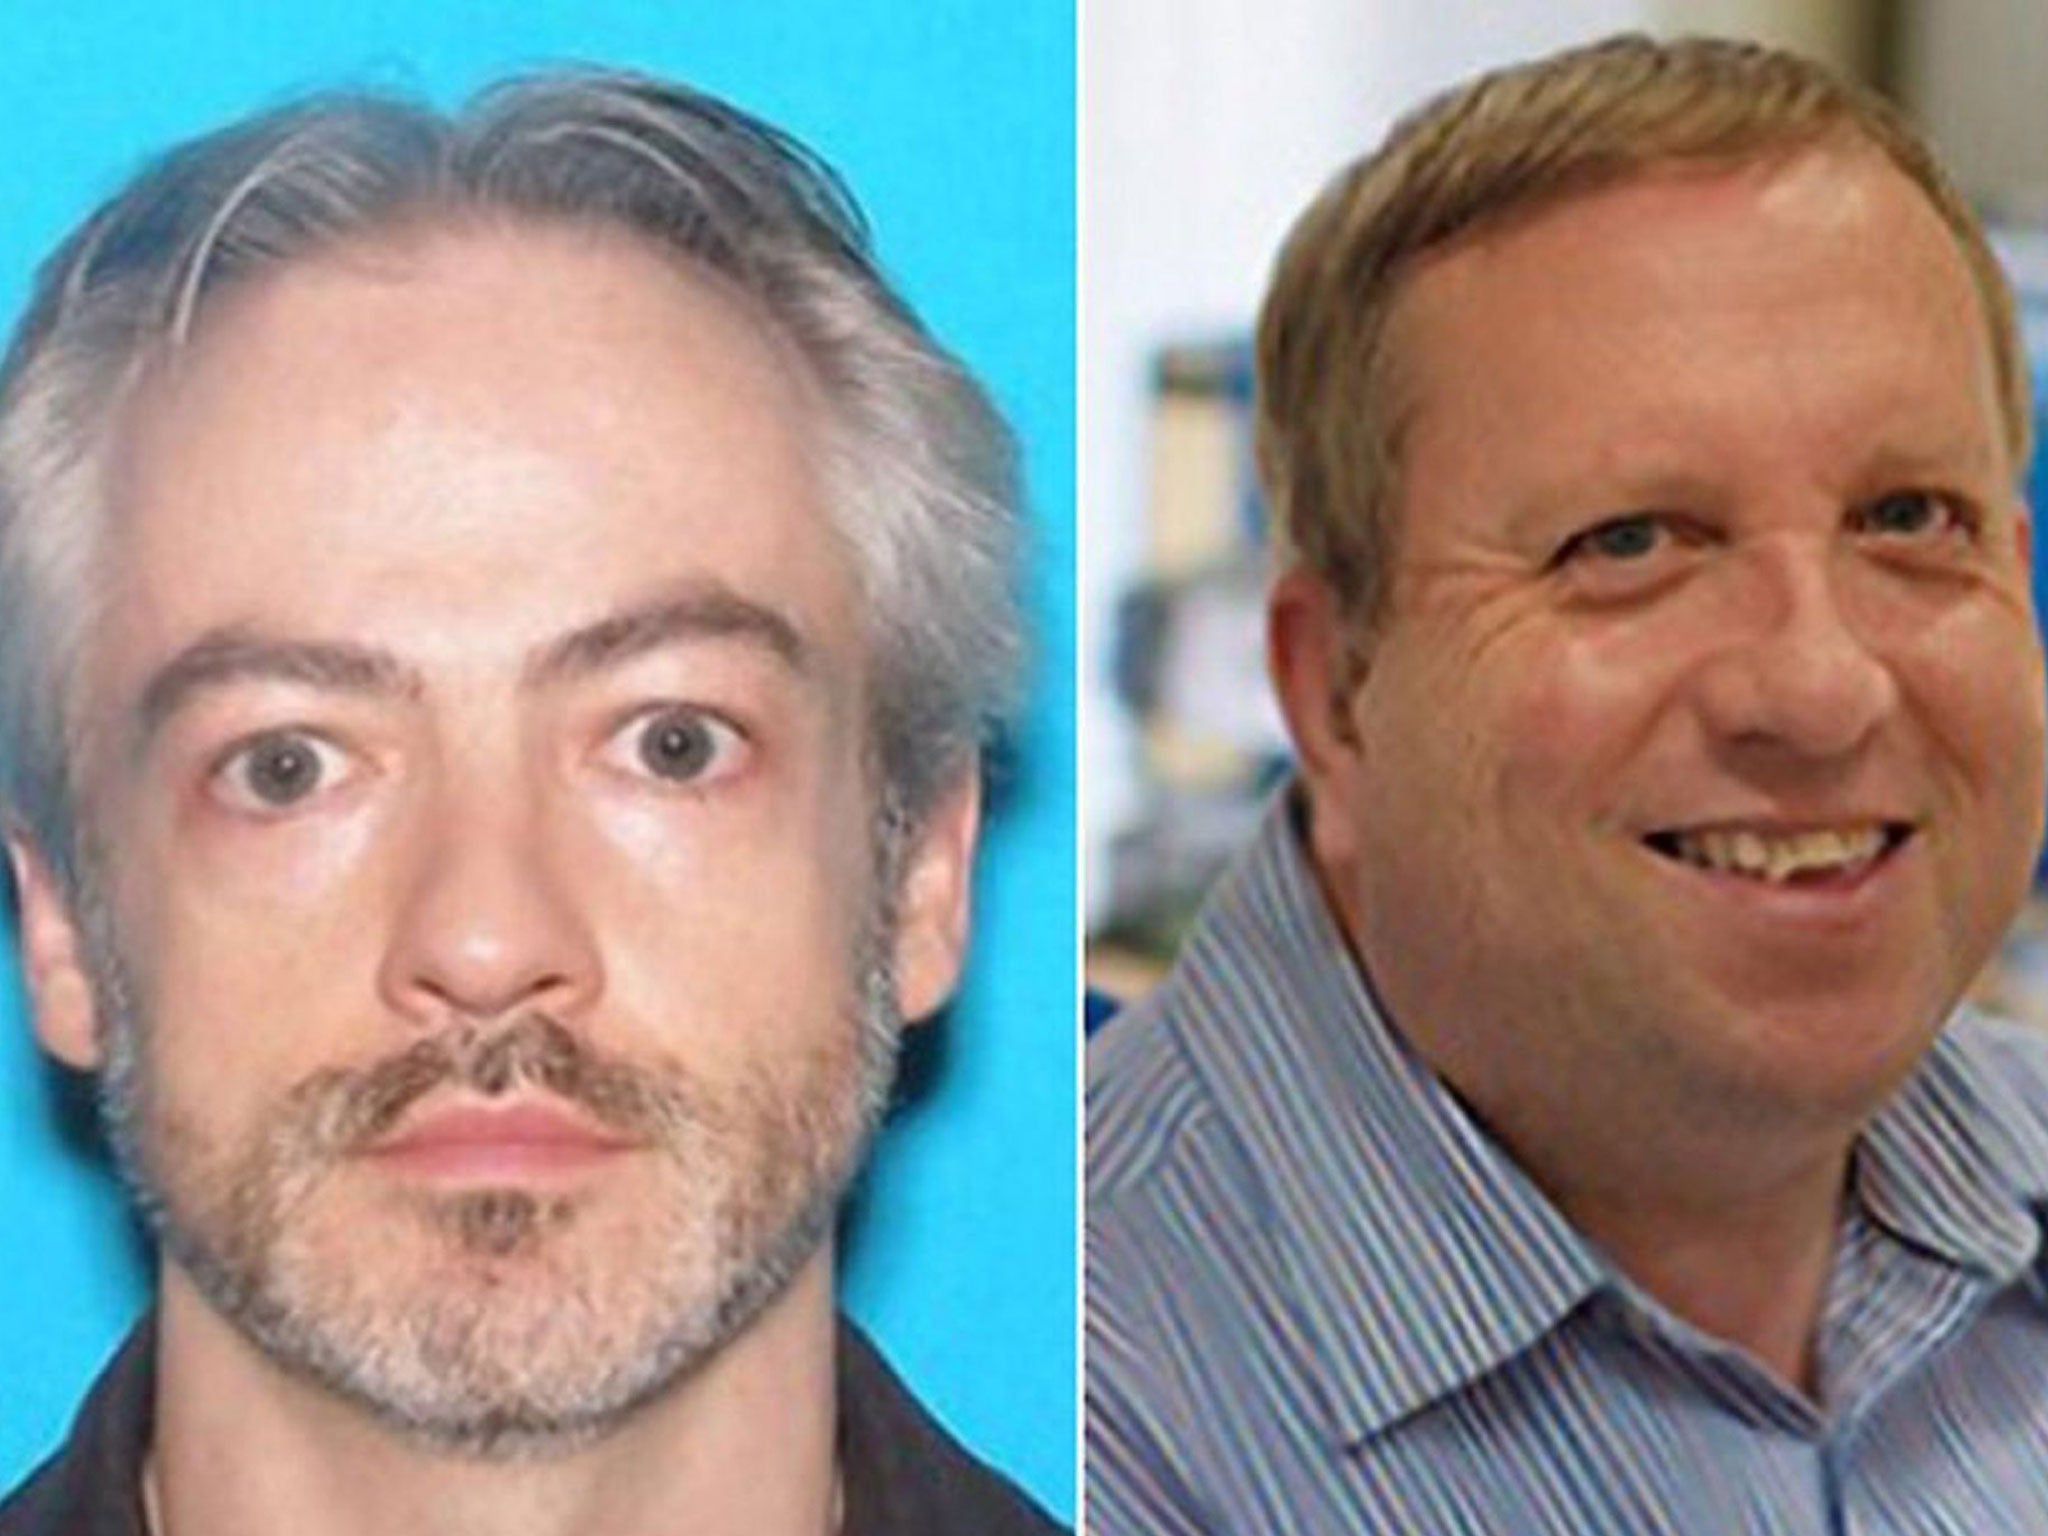 Prof Wyndham Lathem (L), 42, and Andrew Warren (R), 56, are wanted for first-degree murder by Chicago police